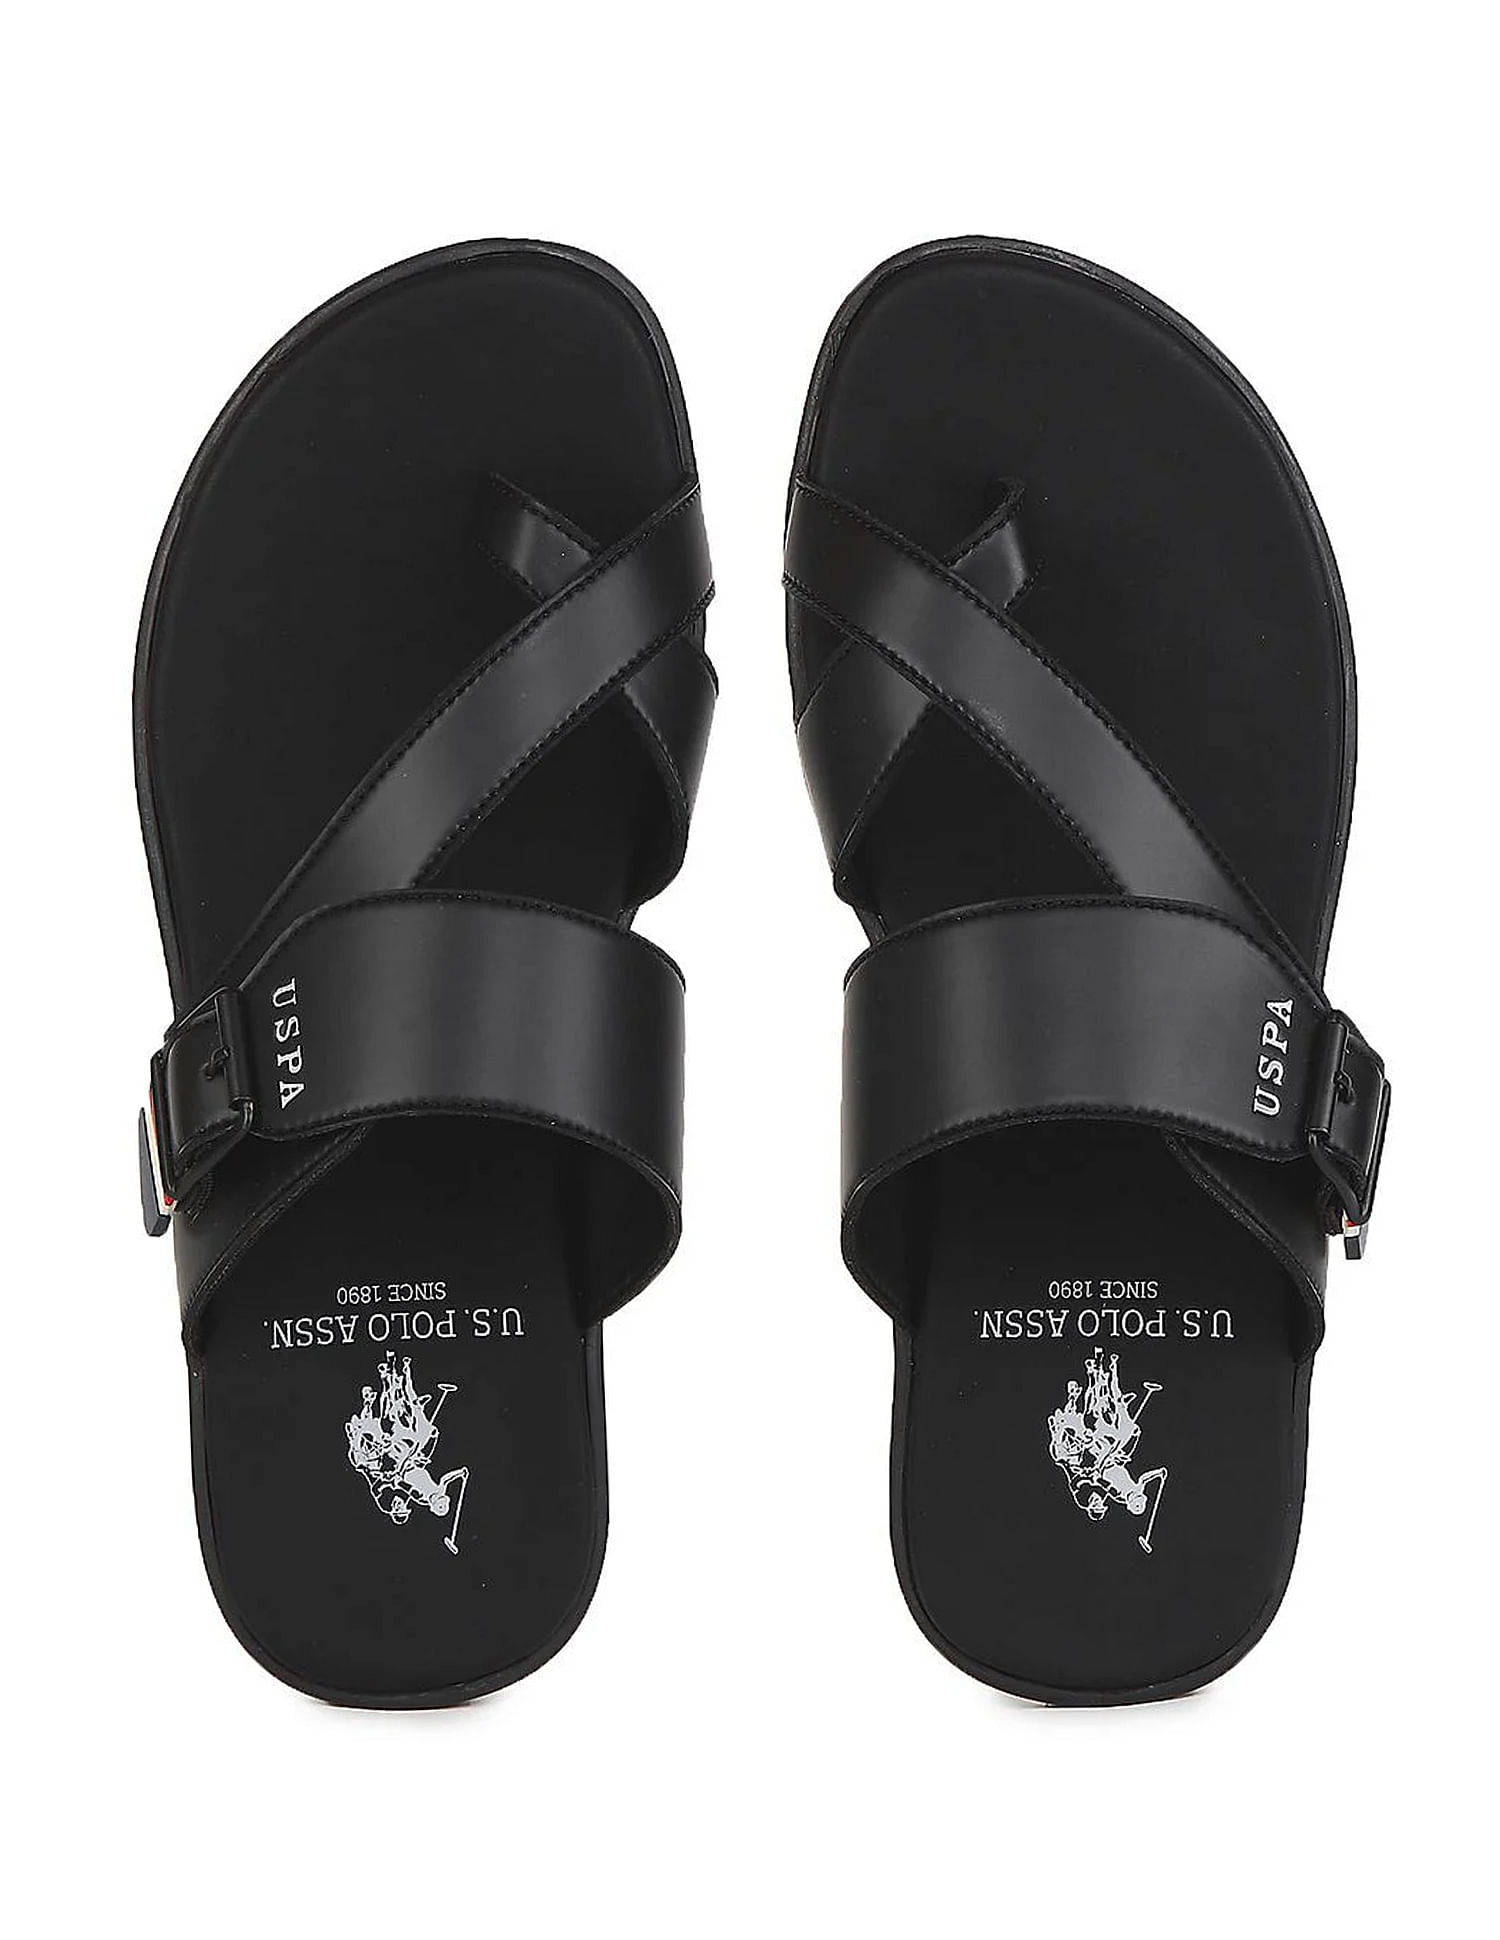 Sandals for Men - Upto 50% to 80% OFF on Sandals & Floaters Online at Best  Prices in India | Flipkart.com